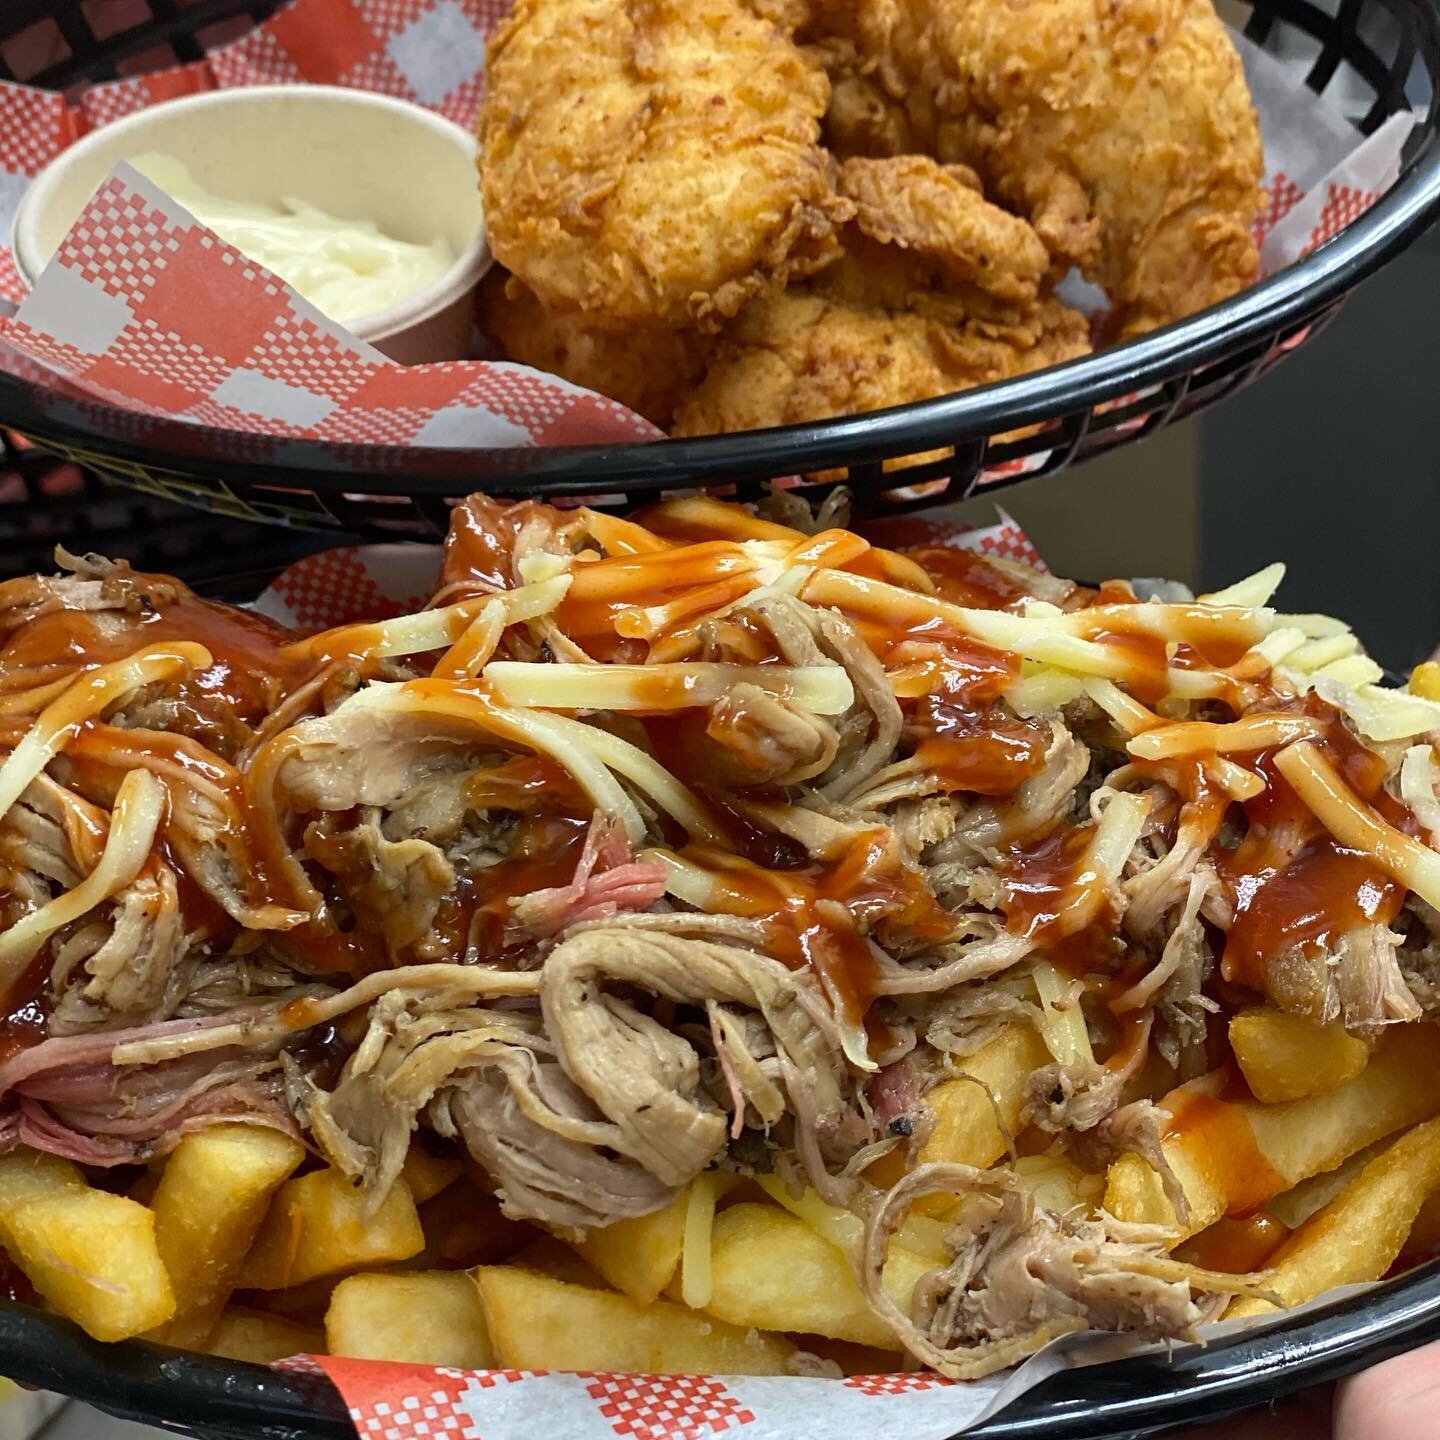 Would you like LOADED fries with that?!&hellip; simple pleasures&hellip; 🍟🐷🧀

Get them via @whoods_app and Uber this Thursday and Saturday while we have fries&hellip; there is a dead set, no joke potato shortage and we&rsquo;re not sure how long w